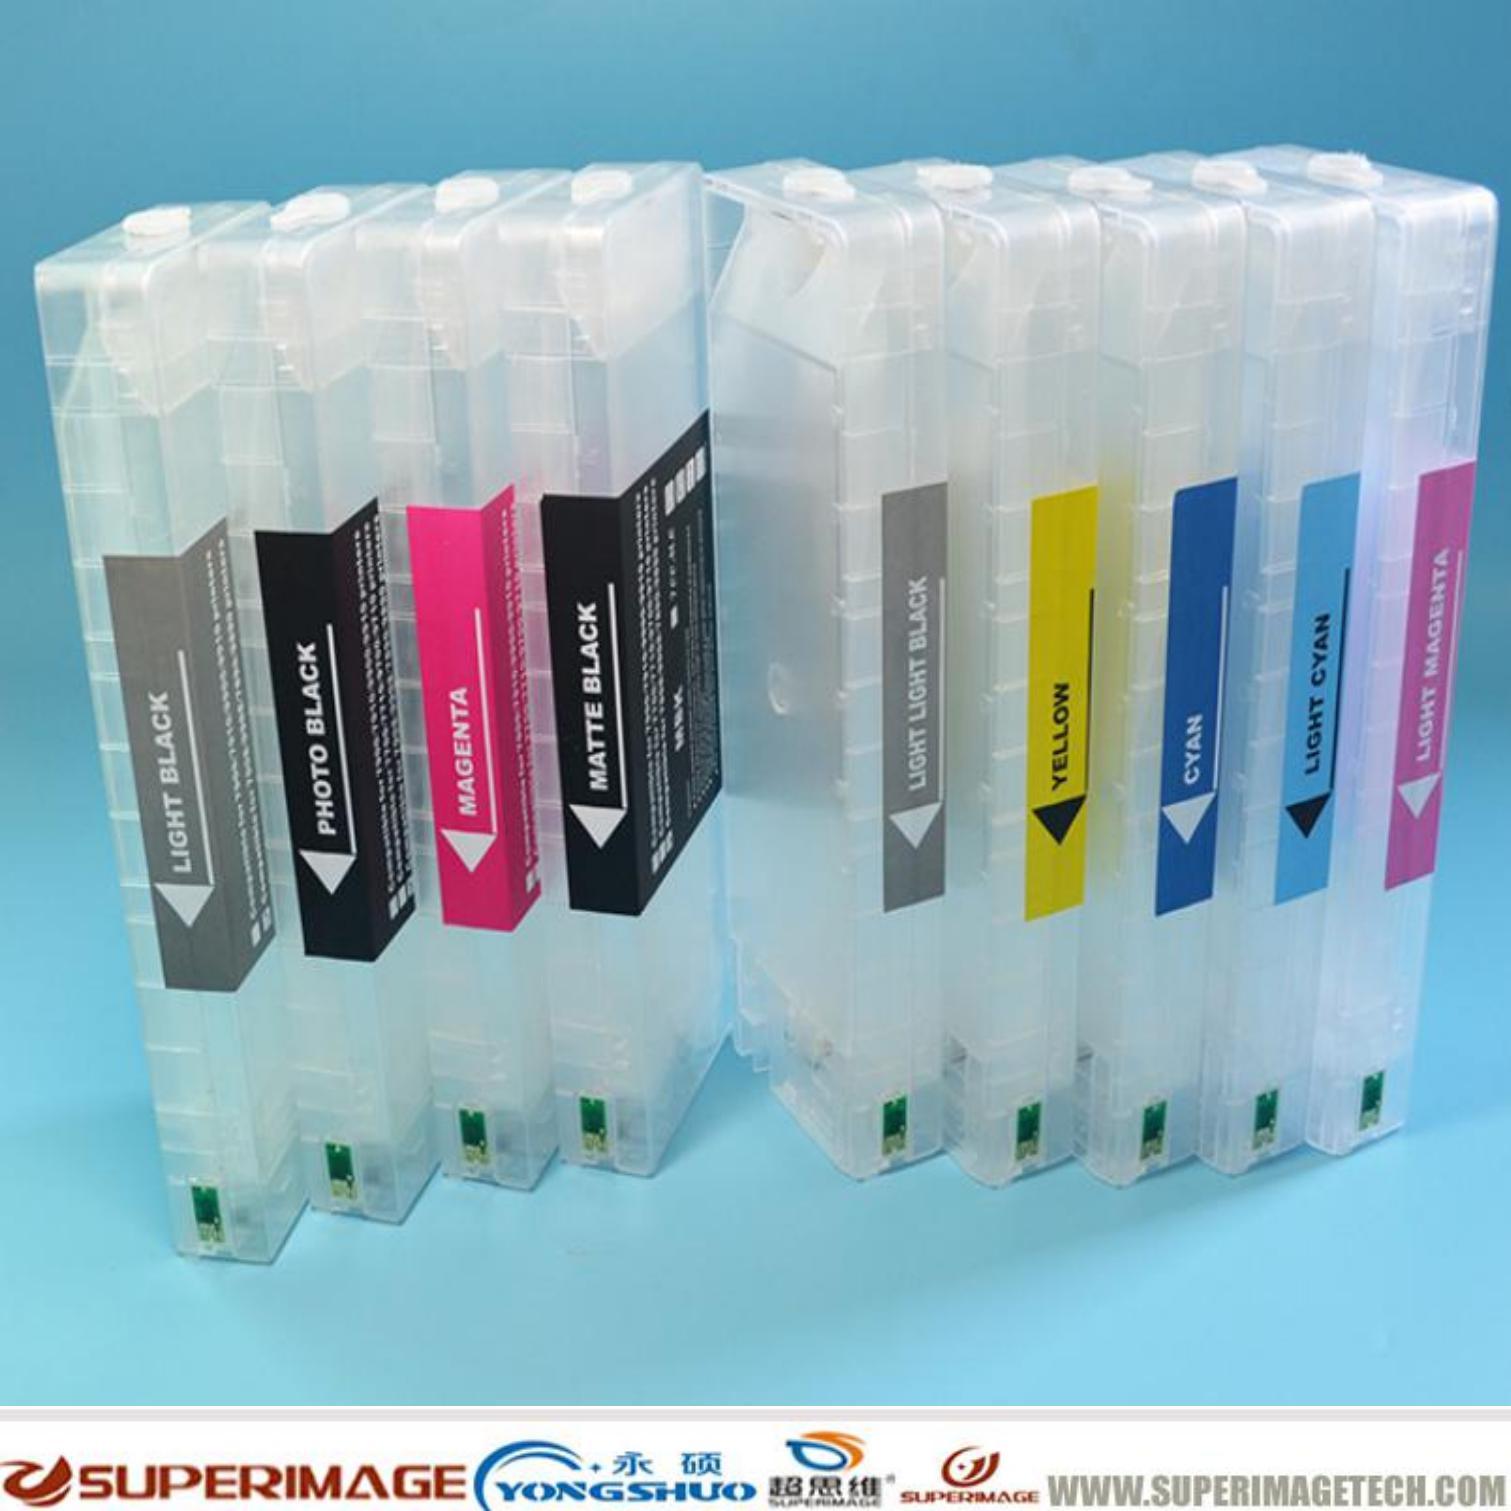 700ml Refill Cartridge for Epson 7700/9700/7710/9710 (SI-BIS-RC1518#)